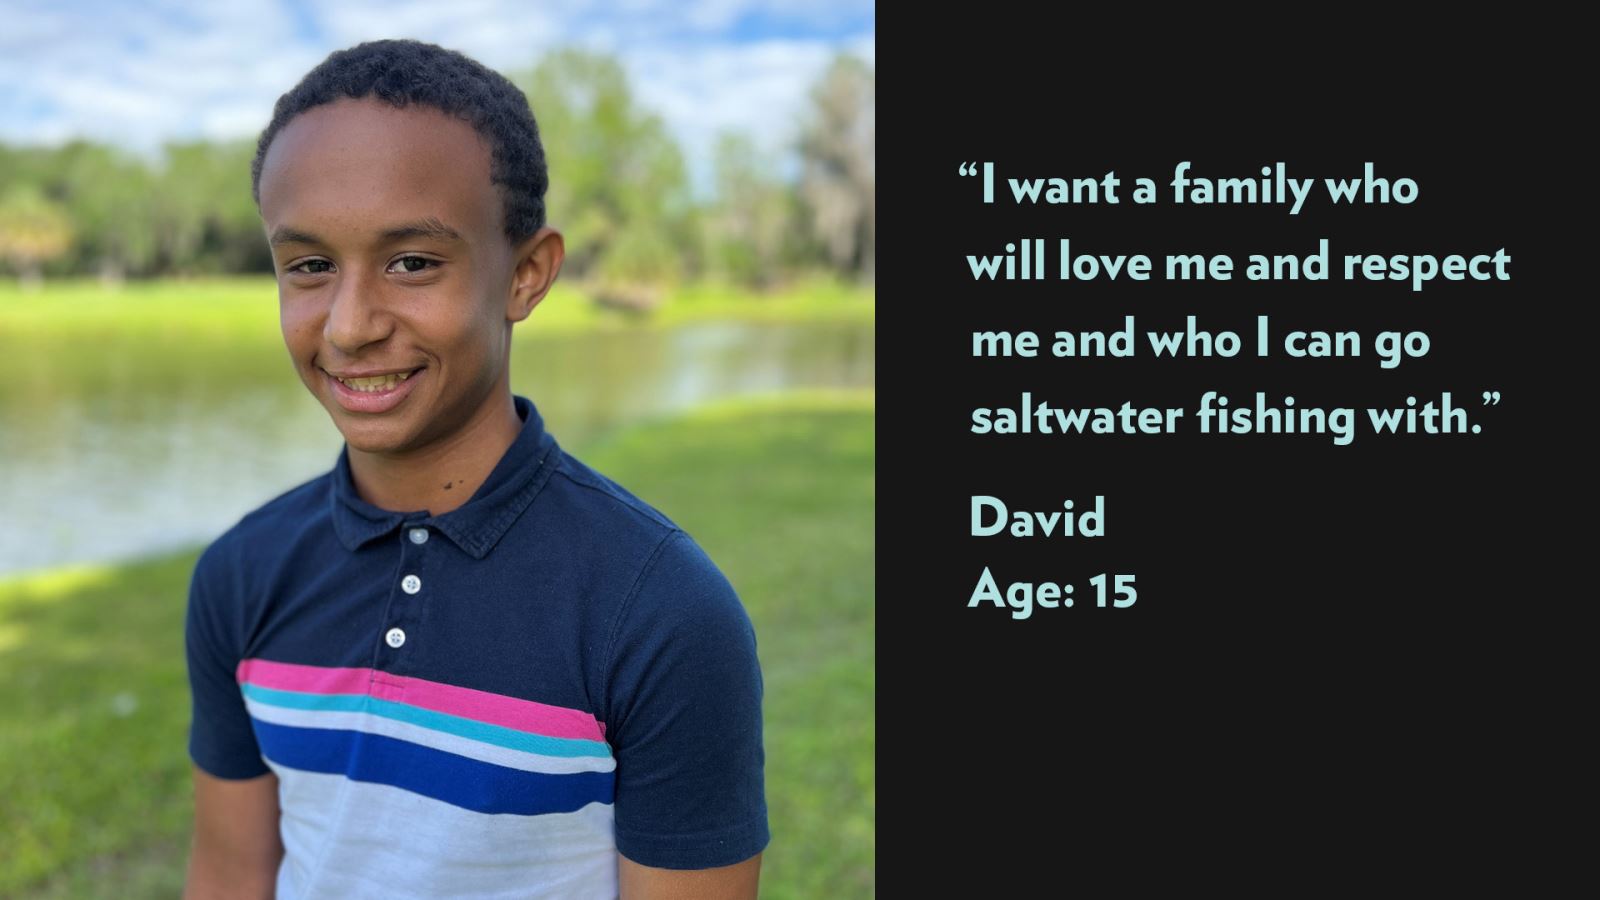 I want a family who will love me and respect me and who I can go saltwater fishing with. David, age 15. View profile